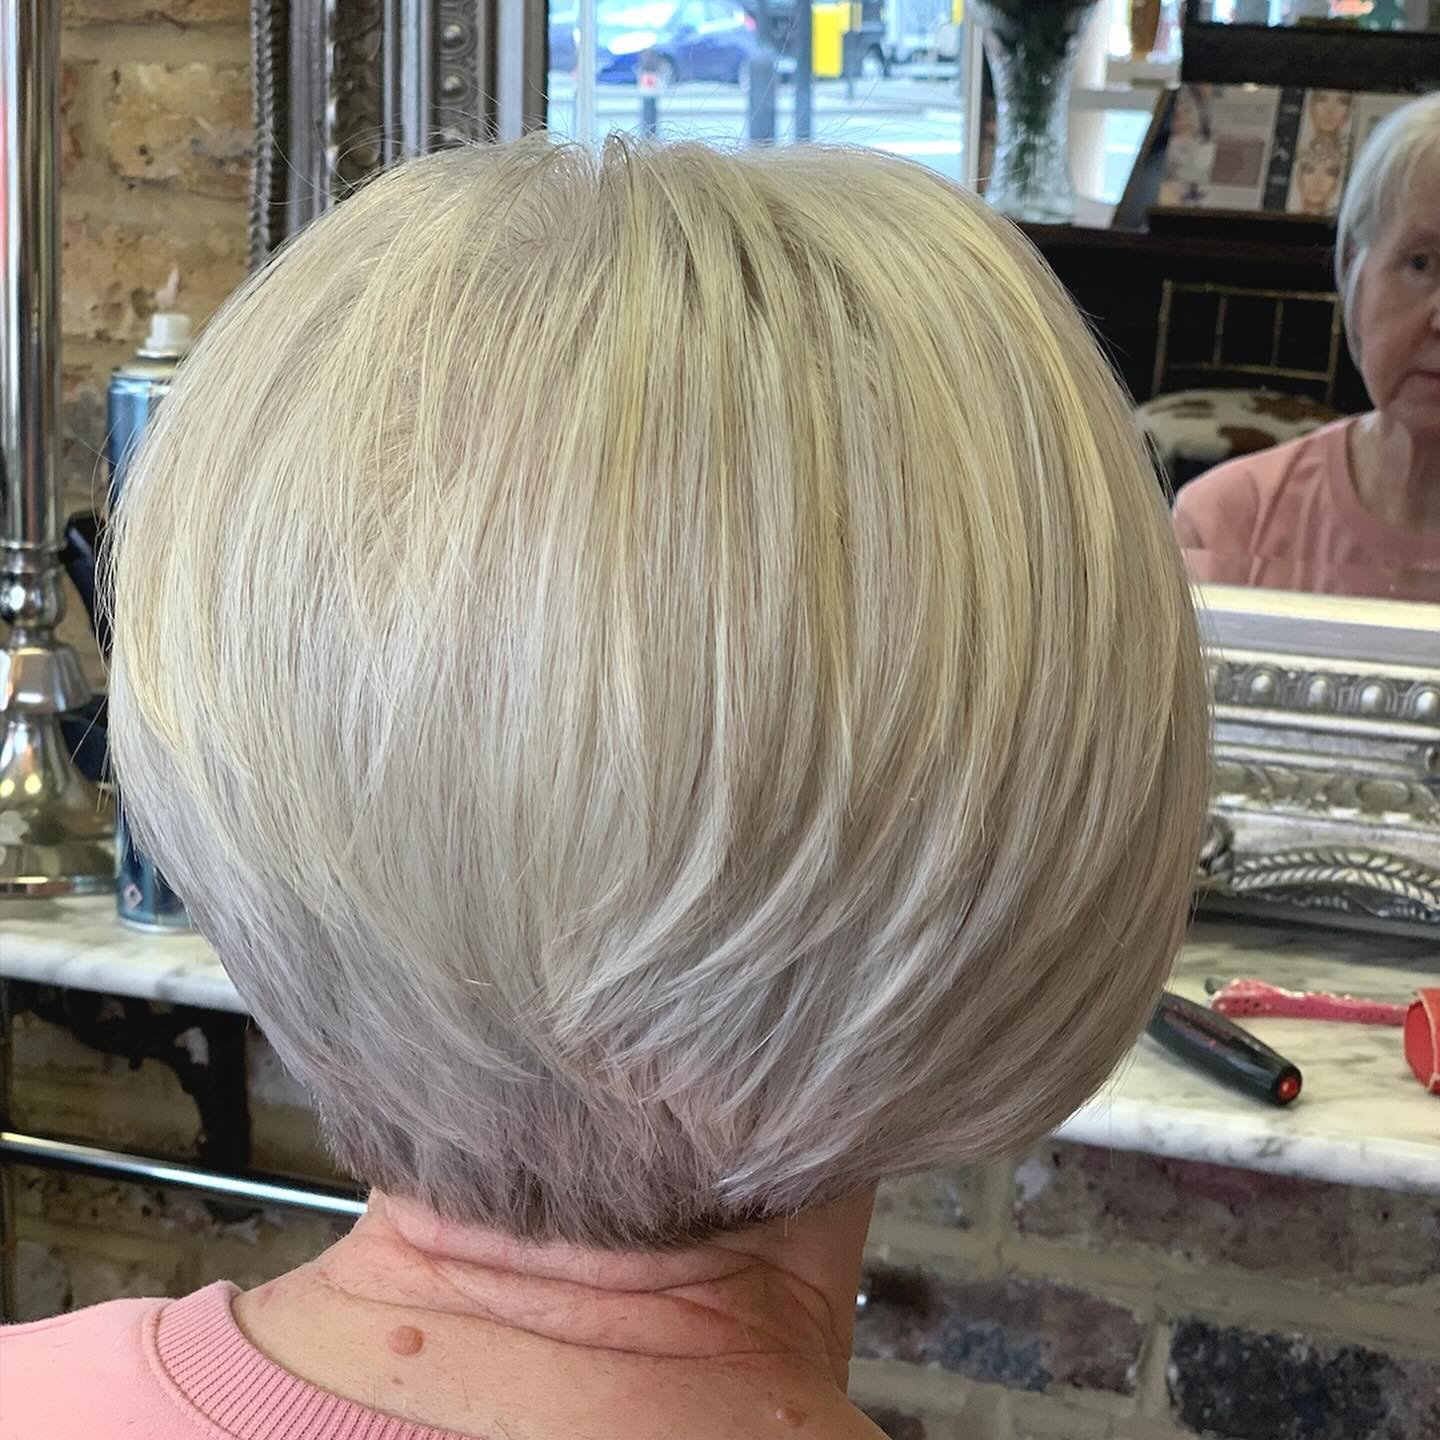 A classic silver bob cut for spring/summer 🤩 Who&rsquo;s also going for a bob cut this season? 👀🤍 Comment below!